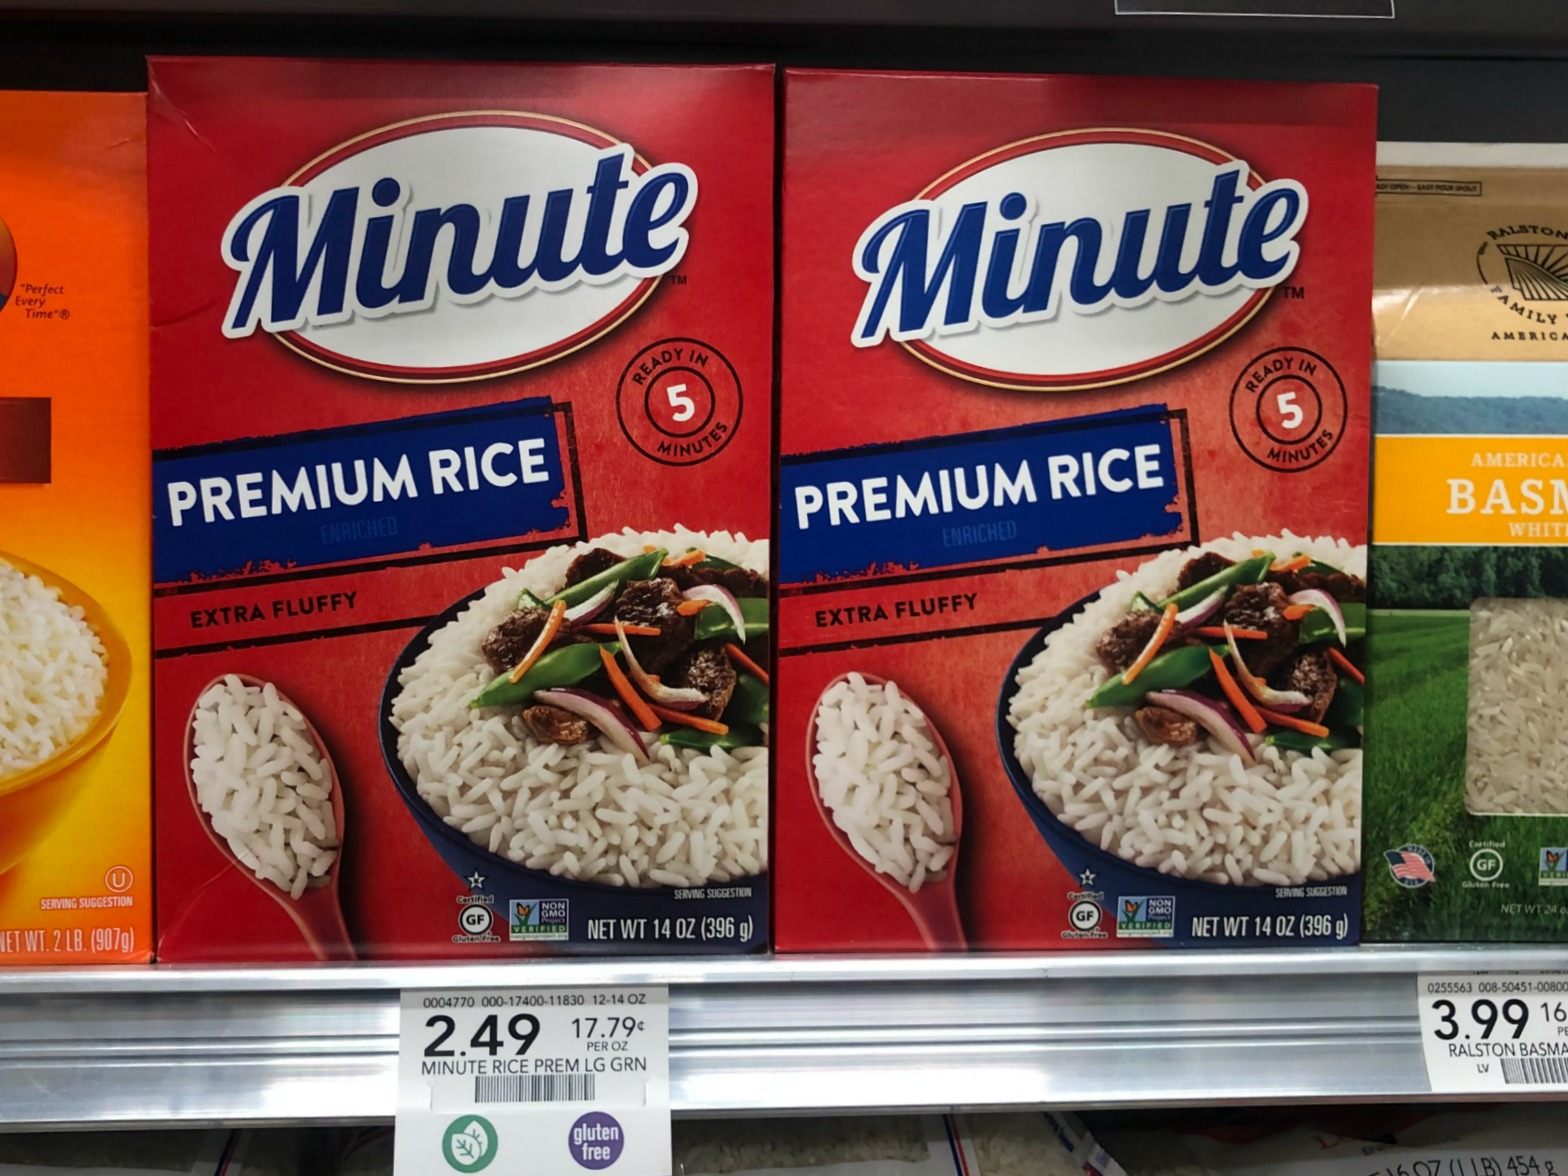 Quick & Easy Bulgogi For Your Busy Weeknight - Save On Minute Instant Rice Now At Publix on I Heart Publix 3